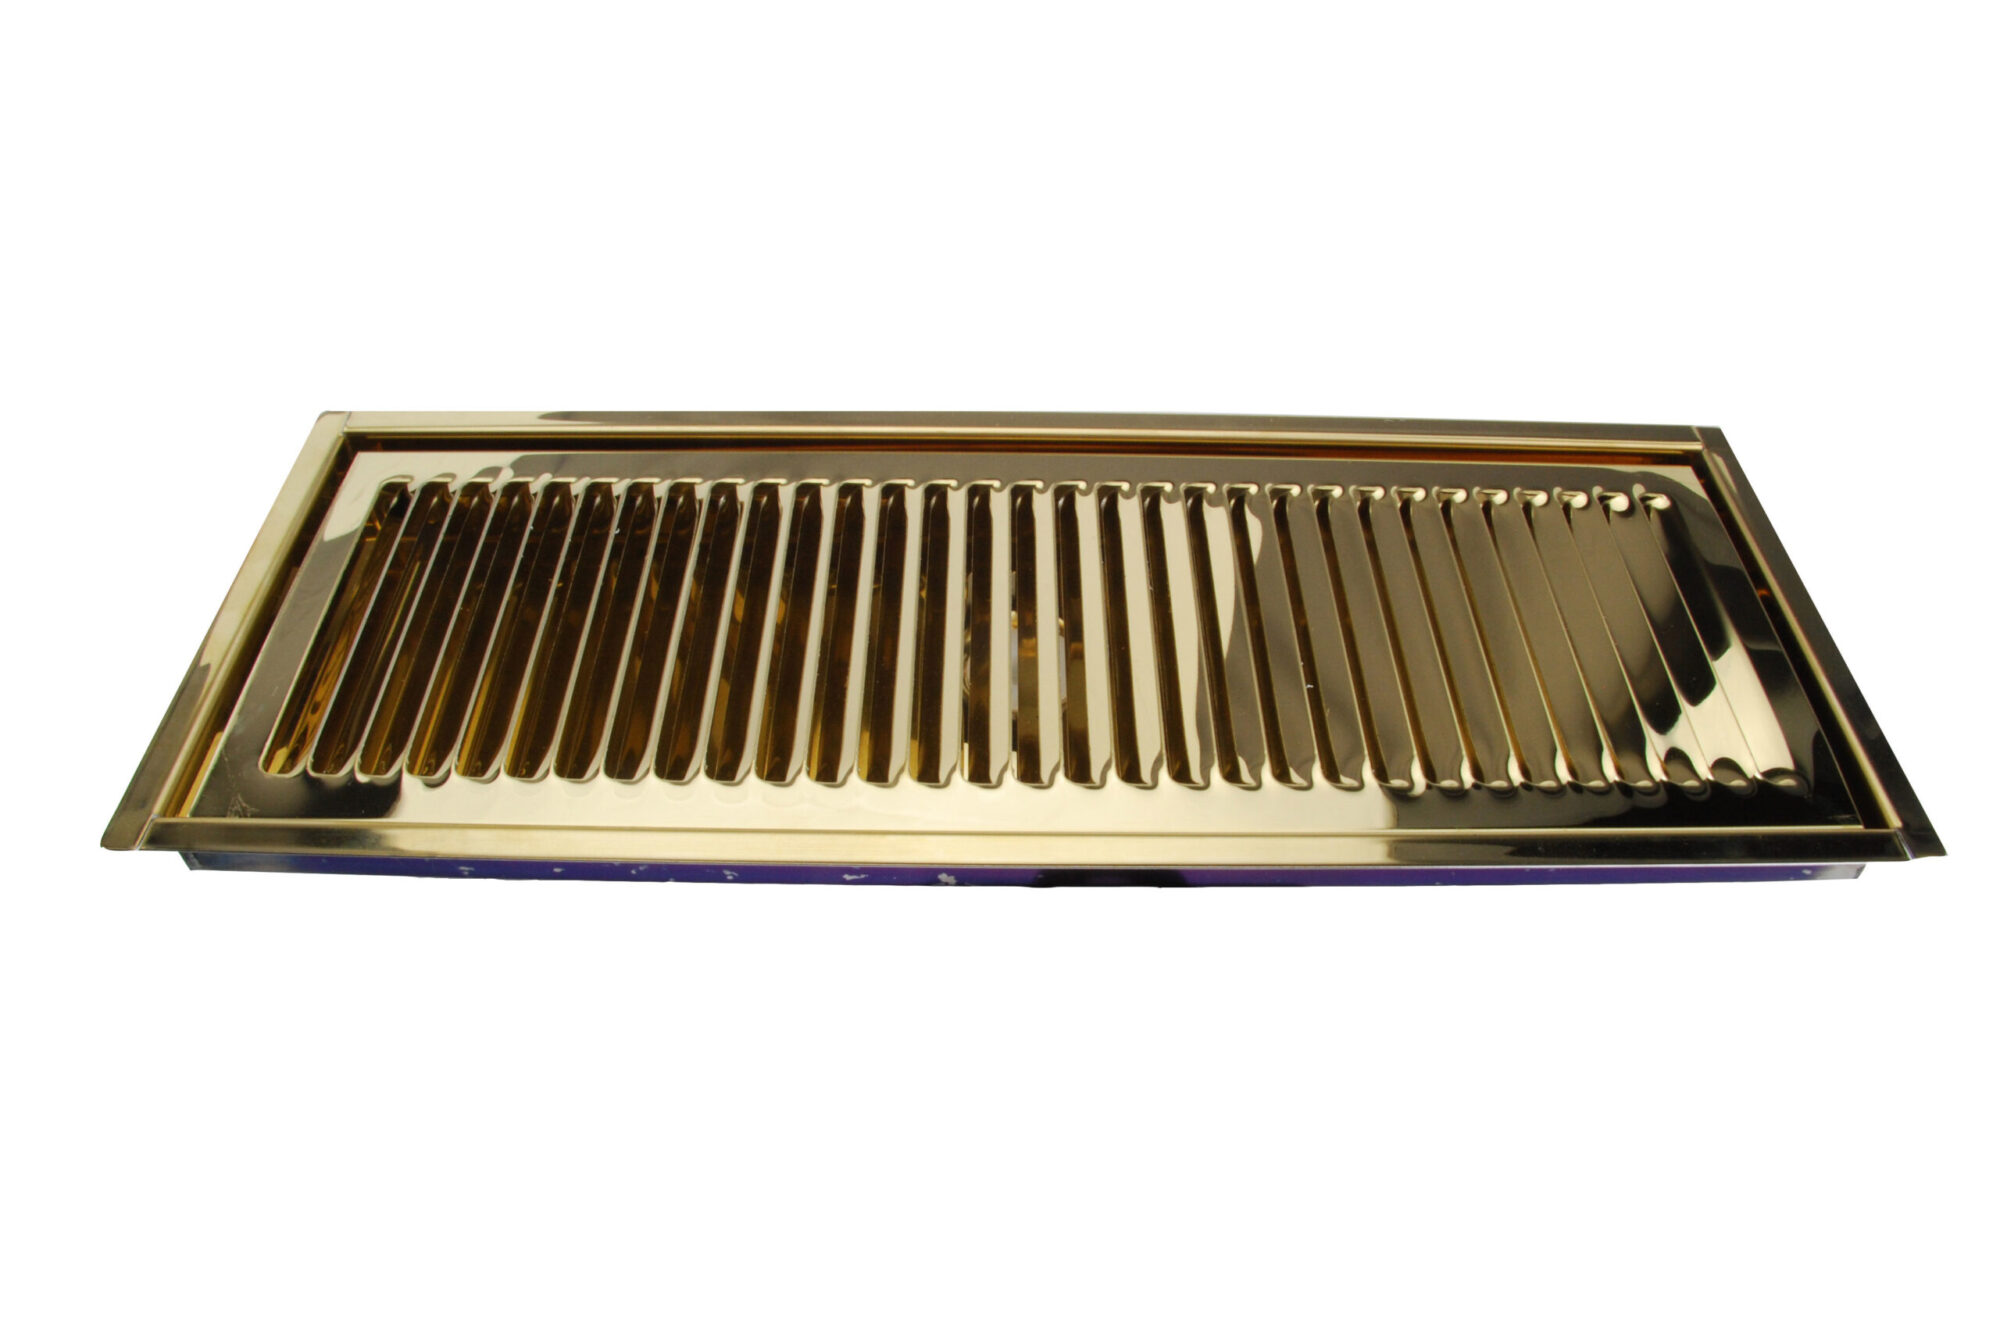 616FBSM PVD Brass Flush Mount Tray with Drain and PVD Brass Grid - 8"L x 5 3/8"W x 3/4"D